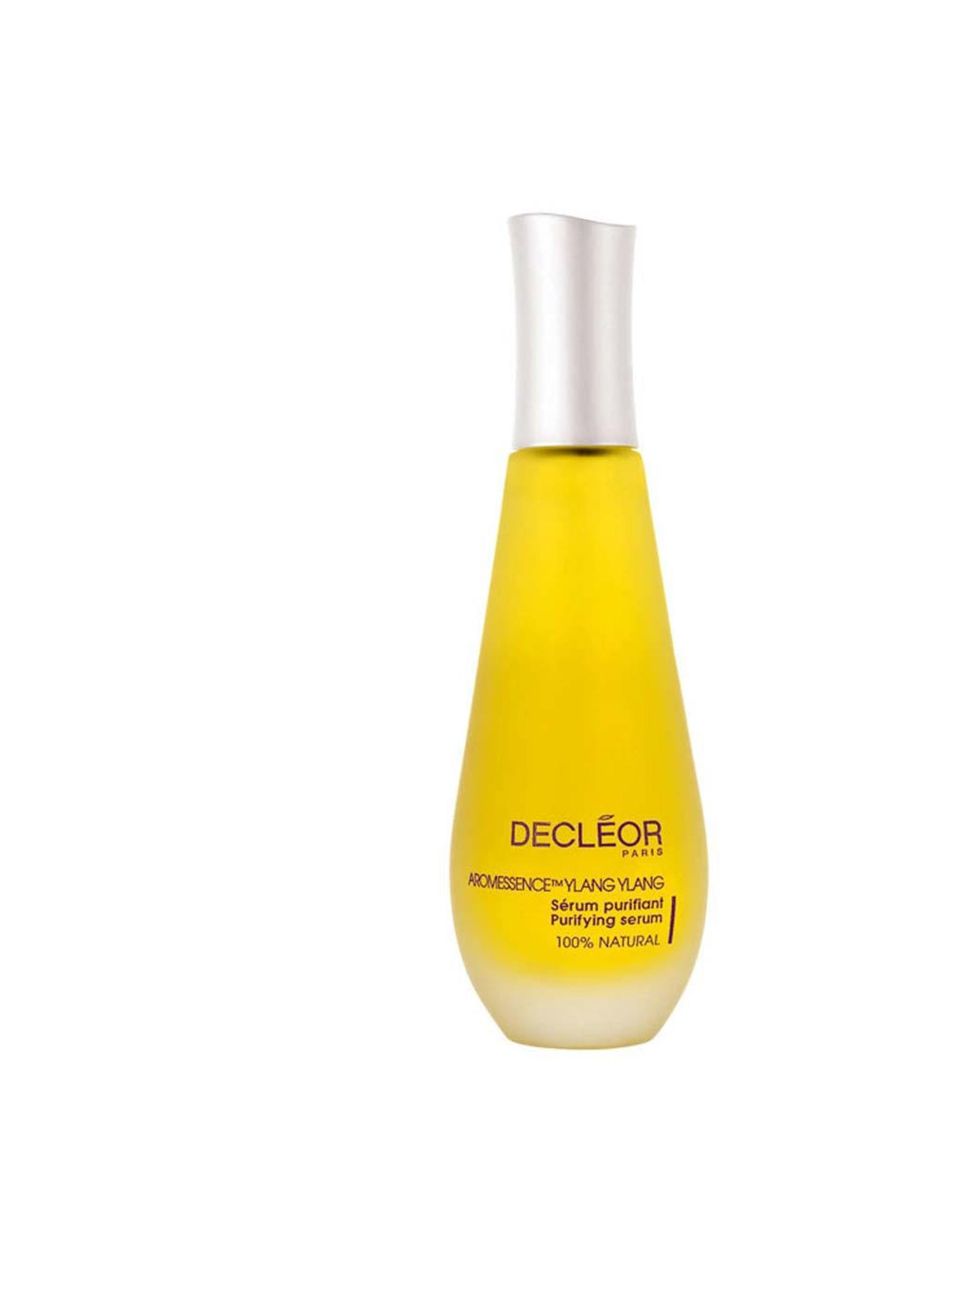 <p><a href="http://www.liberty.co.uk/fcp/product/Liberty/BEAUTY/Aromessence-Ylang-Ylang-Oil-Decl%C3%A9or/66605">Decleor</a> Aromessence Ylang Ylang Oil, Was £44 now £30</p>